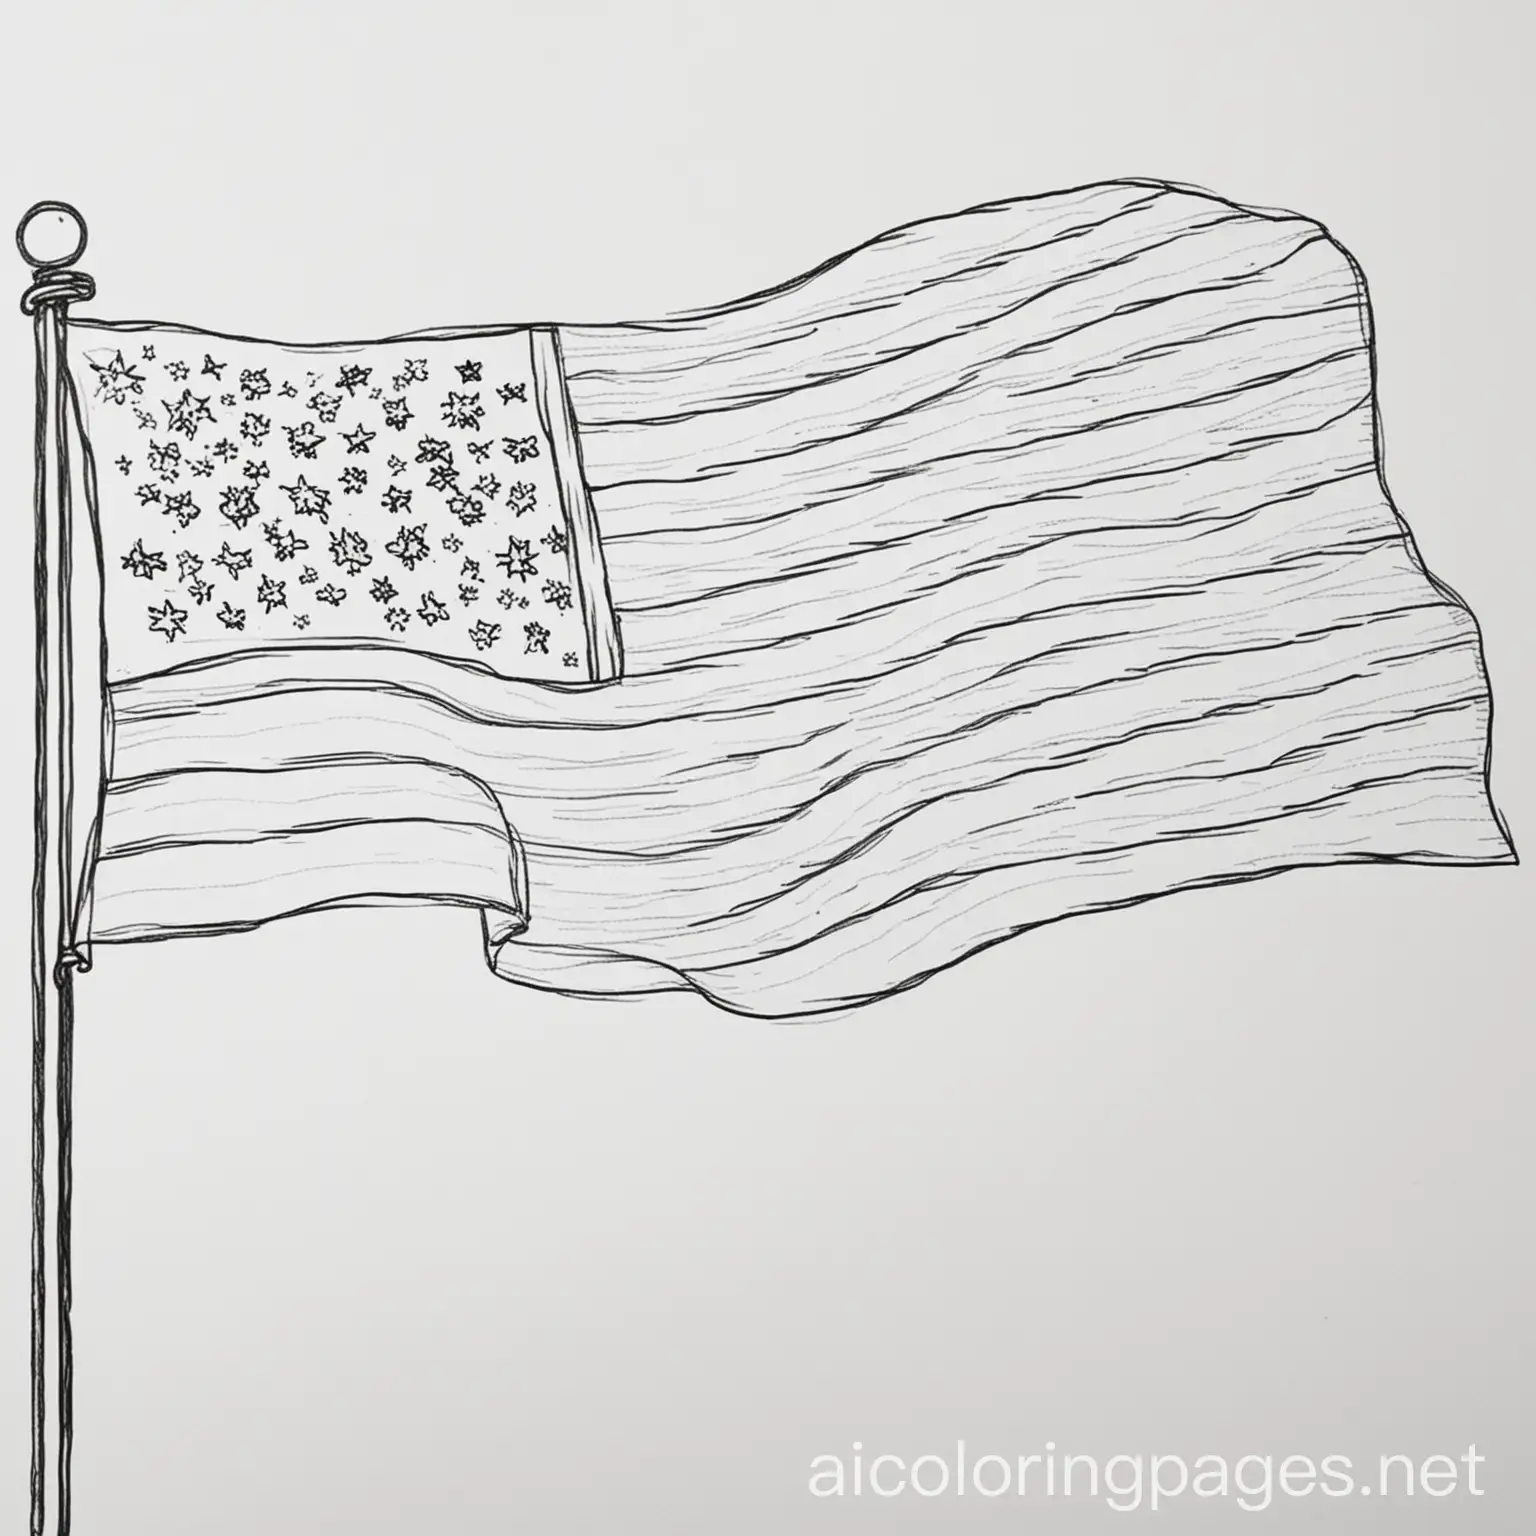 Simple-American-Flag-Coloring-Page-for-Kids